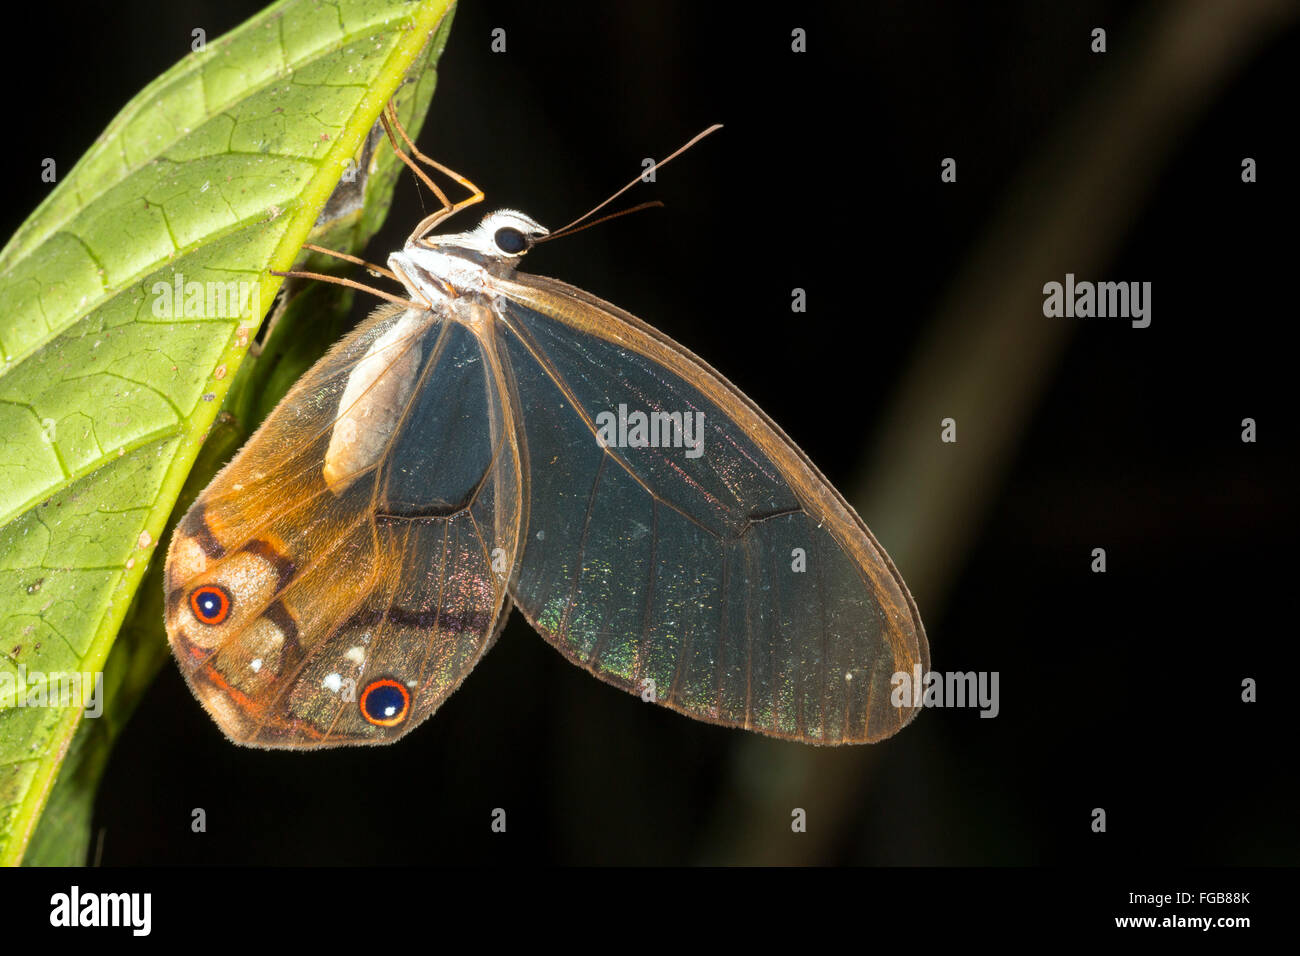 Clearwing butterfly (Haetera piera) Family Satyridae roosting on a leaf at night in the rainforest understory, Ecuador Stock Photo